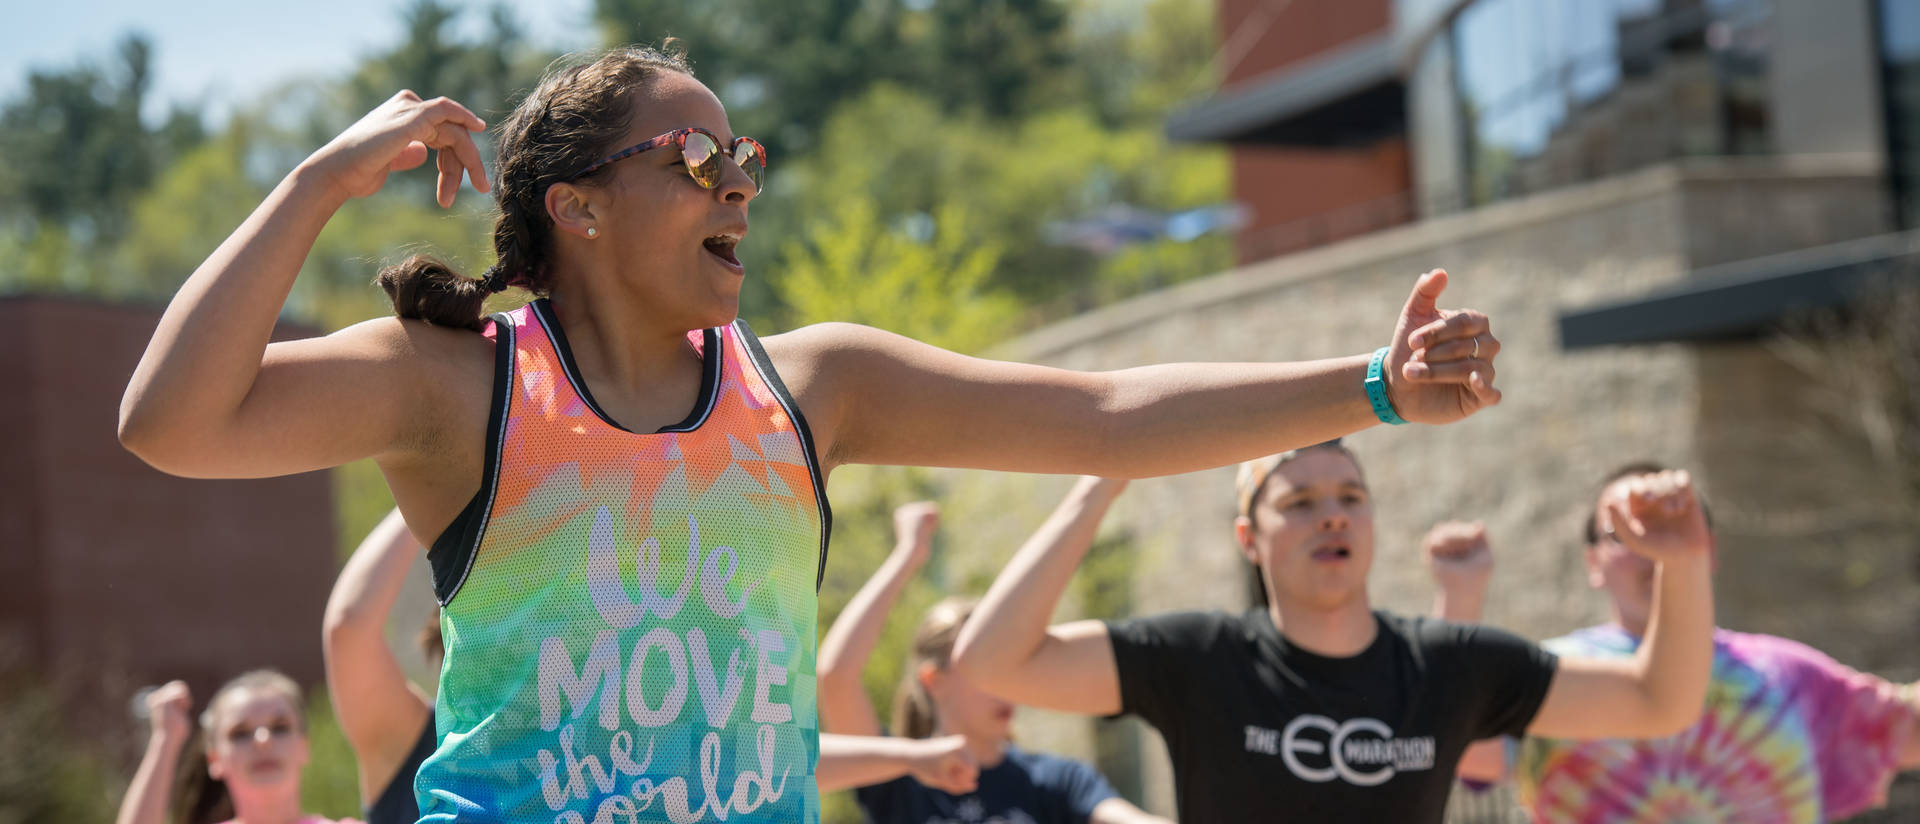 Students doing Zumba on lower campus mall